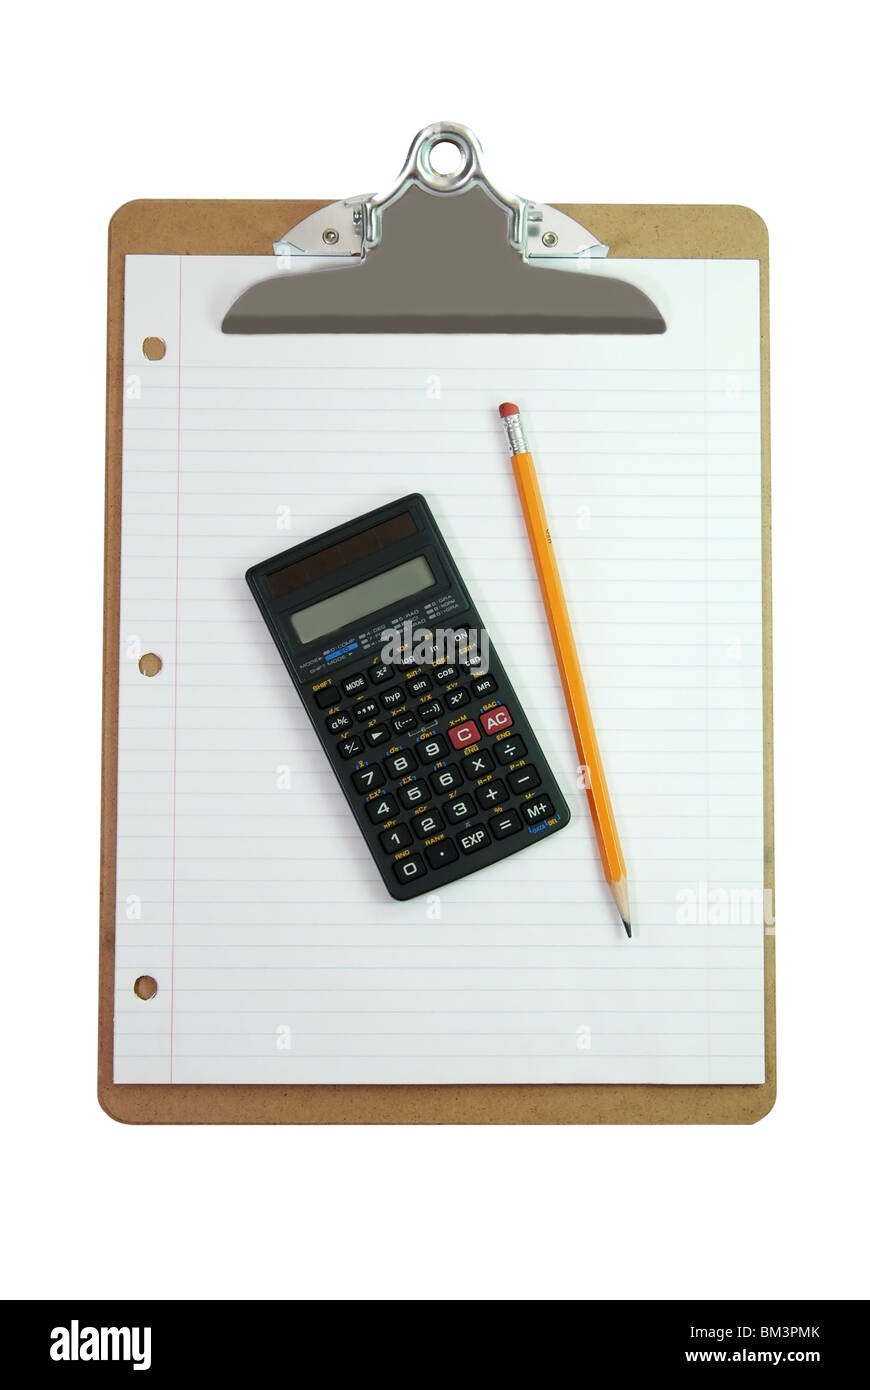 Clipboard, calculator, pencil, and lined white paper isolated on white background with clipping path. Stock Photo